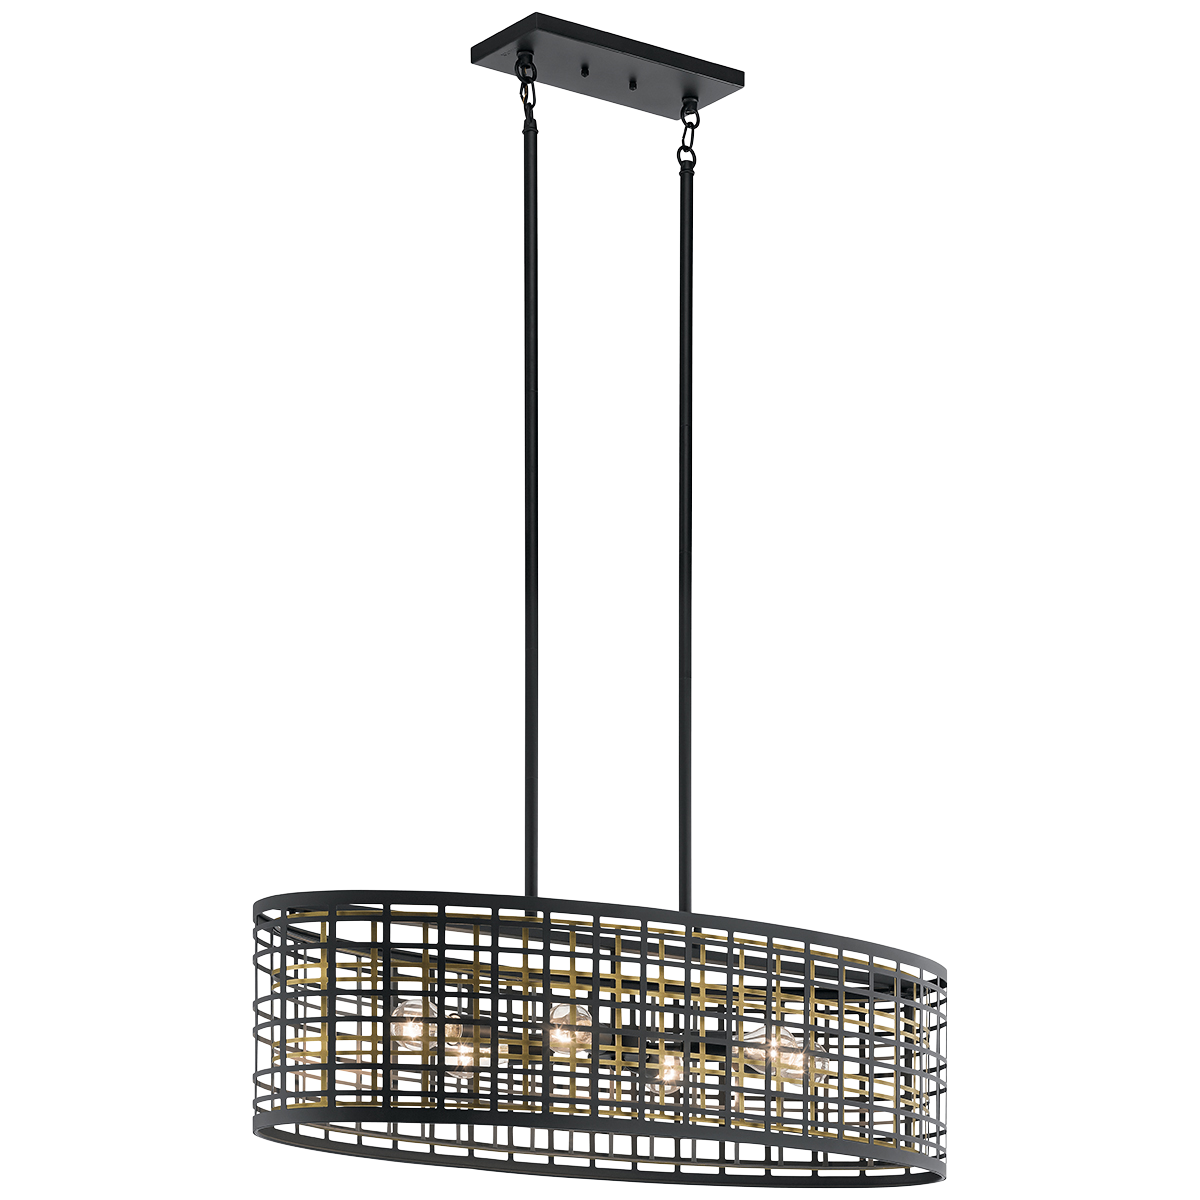 Depth, dimension and geometric interest come together to give the 6-light pendant/oval chandelier in Black from the Aldergate(TM) collection an uncommon style. Overlapping grids in contrasting finishes bring structural interest and softly diffuse the light. The look is inspired by industrial trends, yet sophisticated enough to work in traditional spaces.